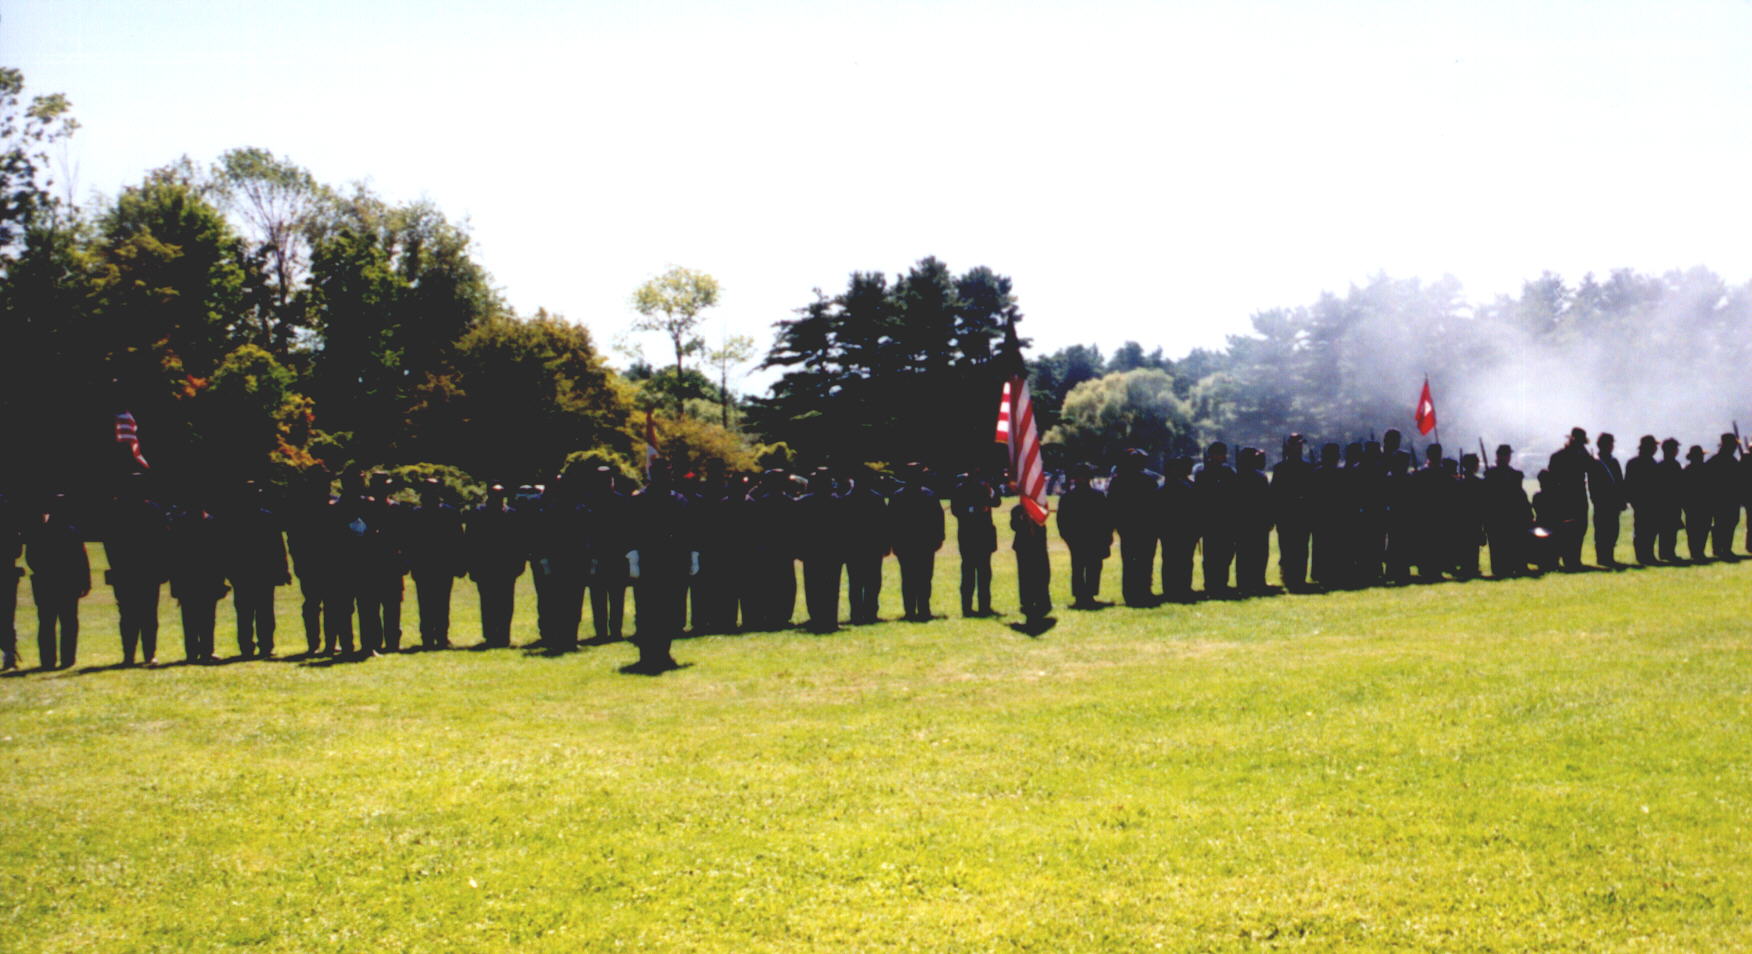 Formation of troops